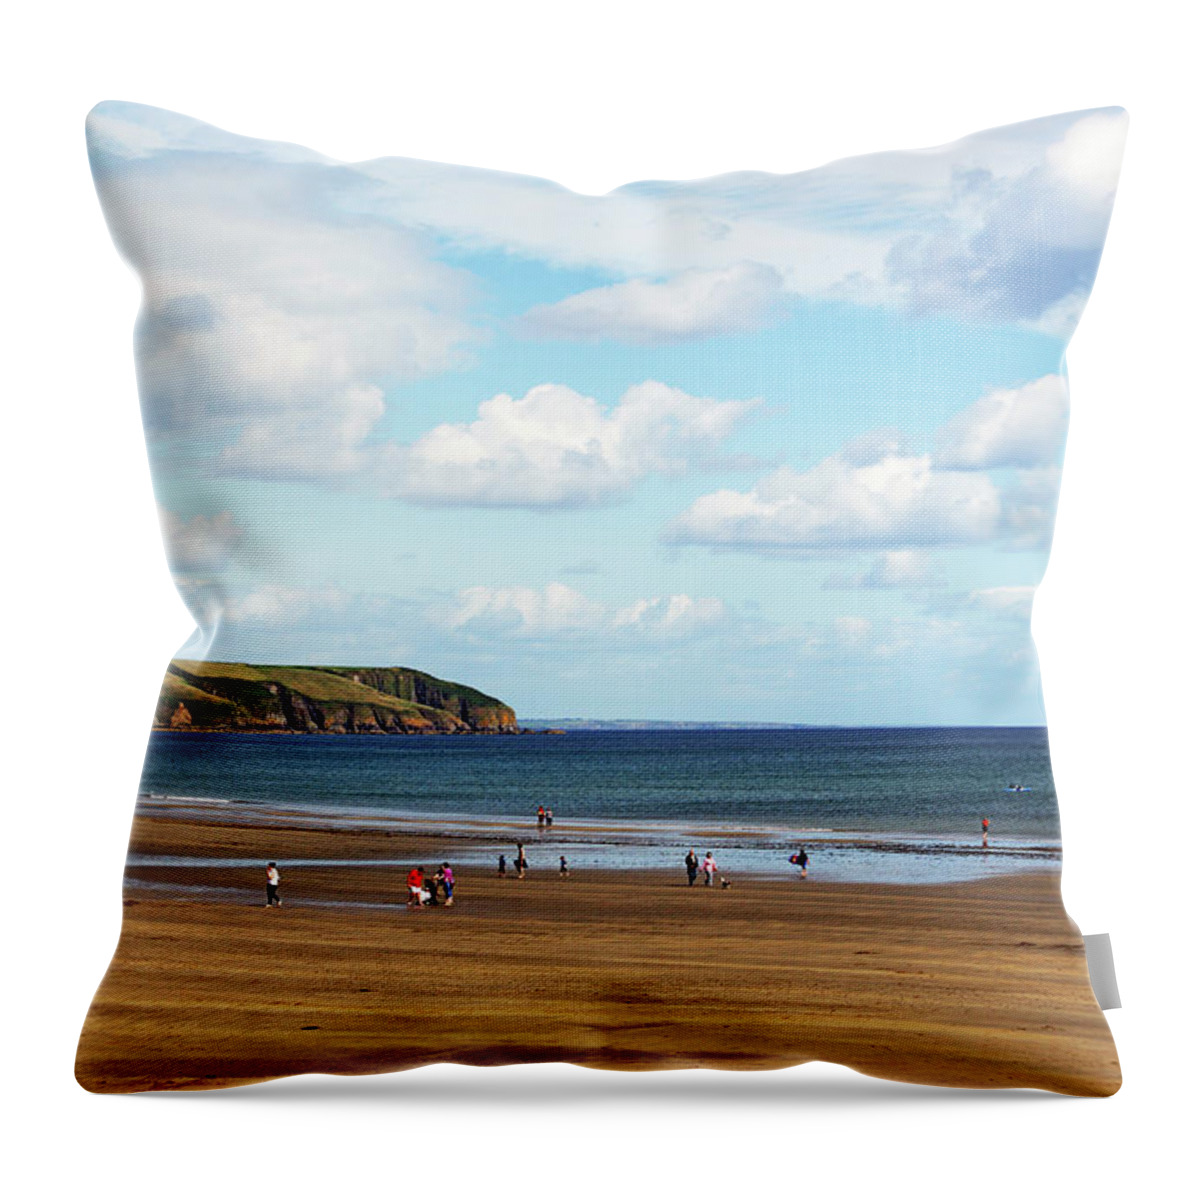 Scenics Throw Pillow featuring the photograph Clonea Strand, Co Waterford, Ireland by Gregoria Gregoriou Crowe Fine Art And Creative Photography.